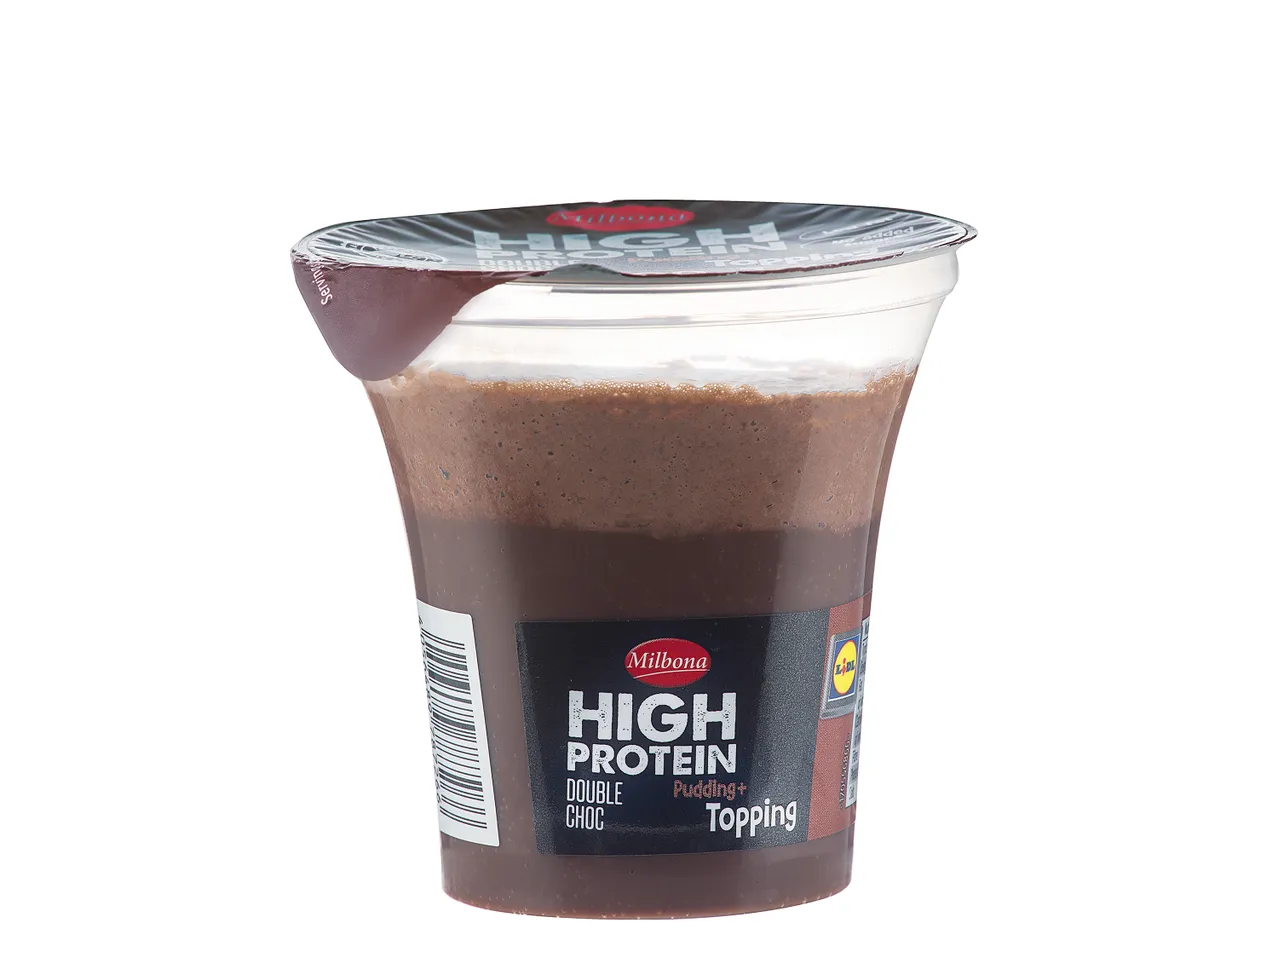 Go to full screen view: Milbona High Protein Double Choc Pudding with Topping - Image 1